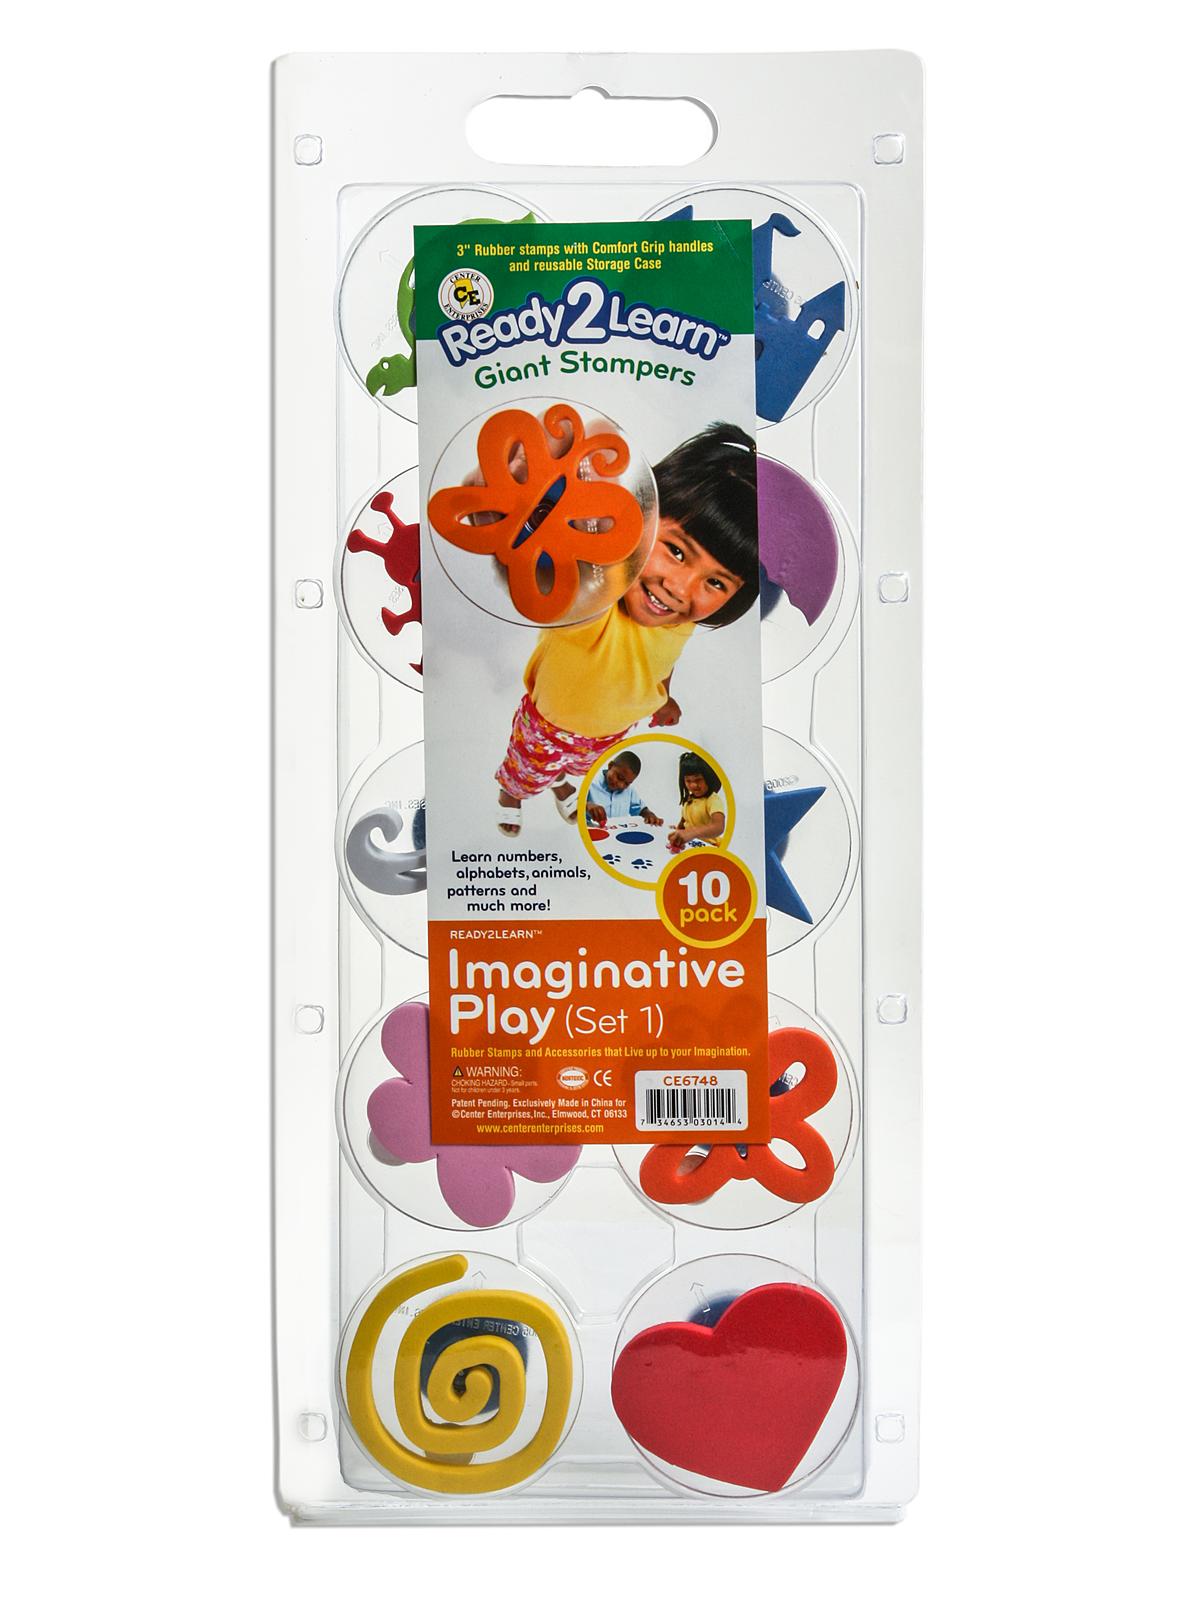 Ready2learn Giant Stampers Imaginative Play 1 Set Of 10